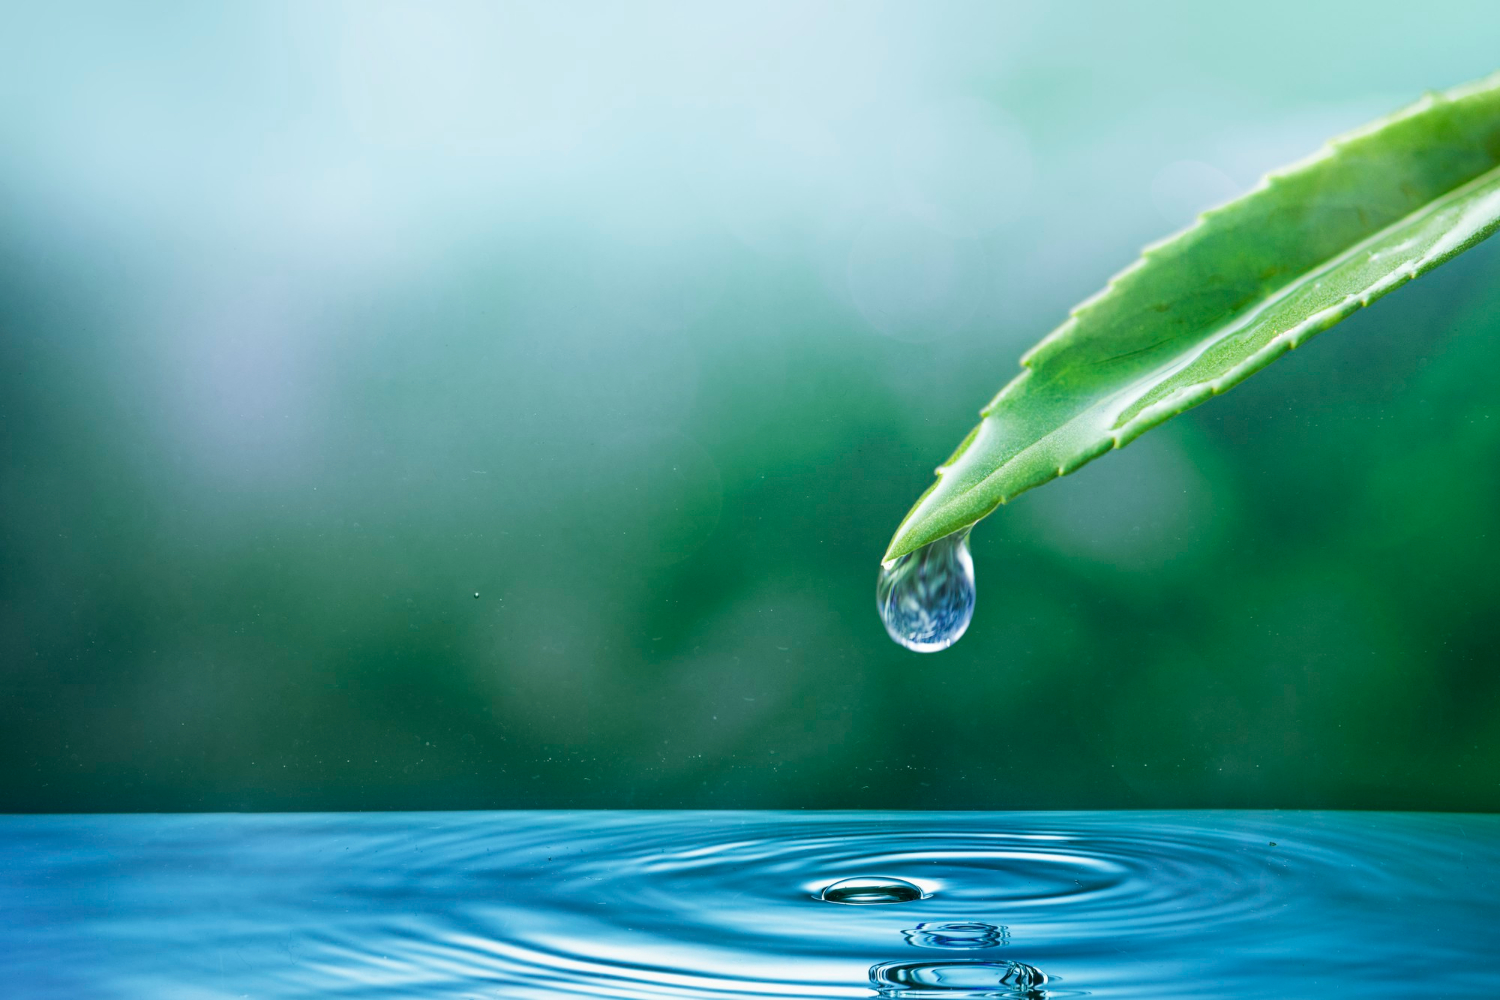 ecosystem-water-drop-nature-background-earth-day-campaign.jpg